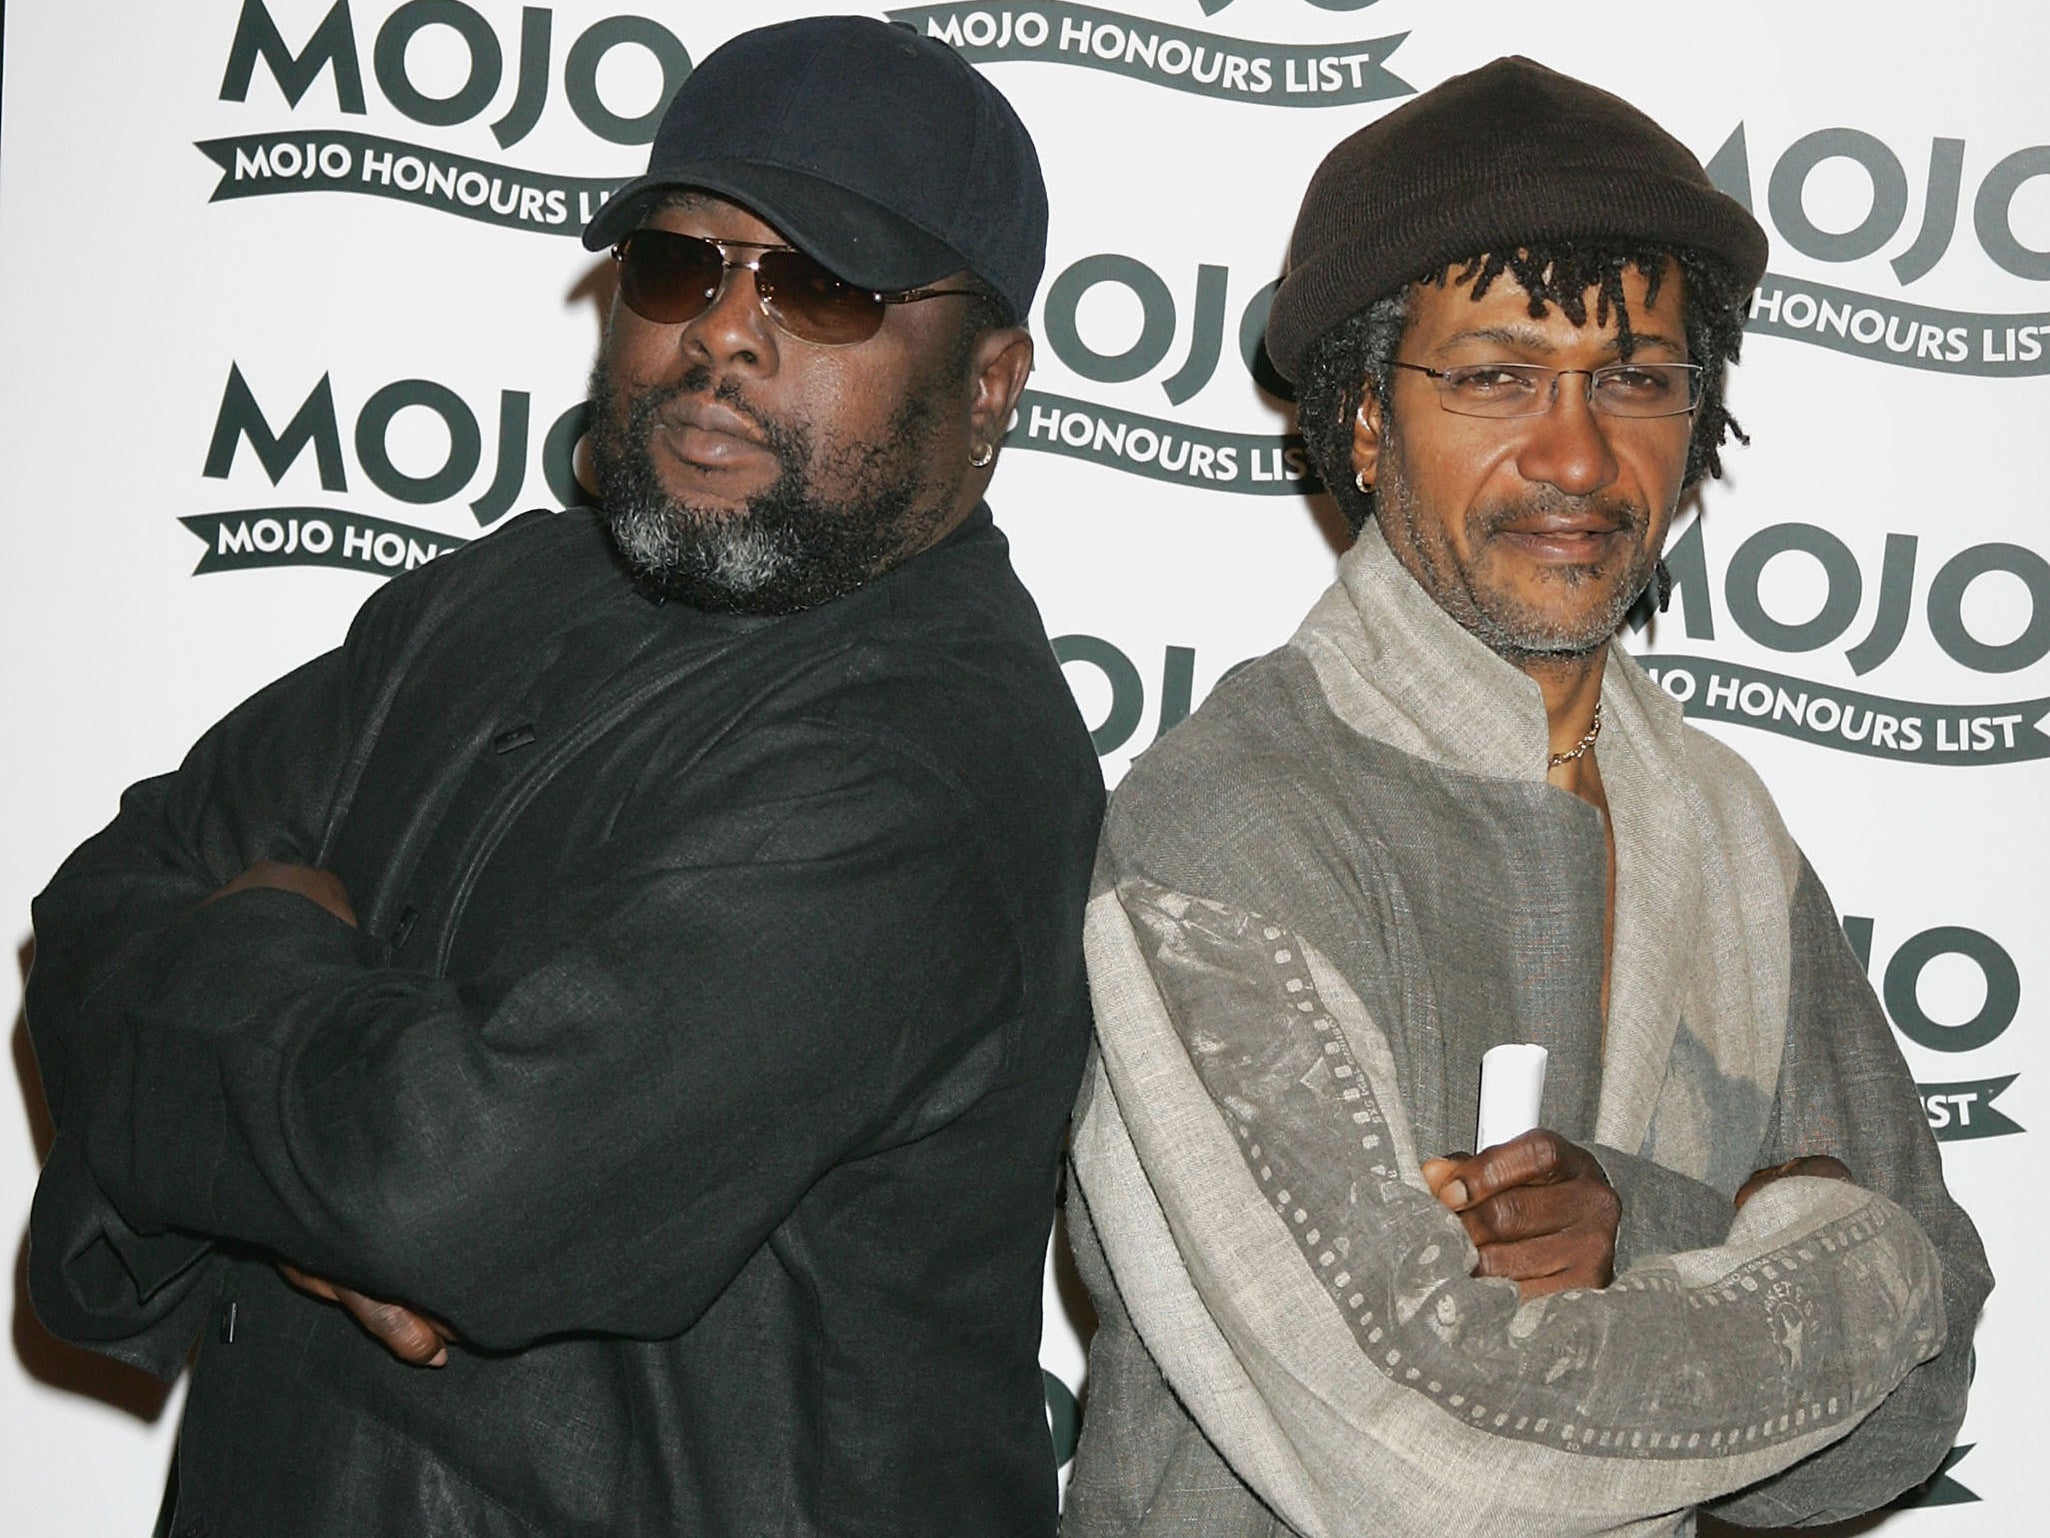 Robbie Shakespeare (left) with Sly Dunbar attending The MOJO Honours List in London in 2005.